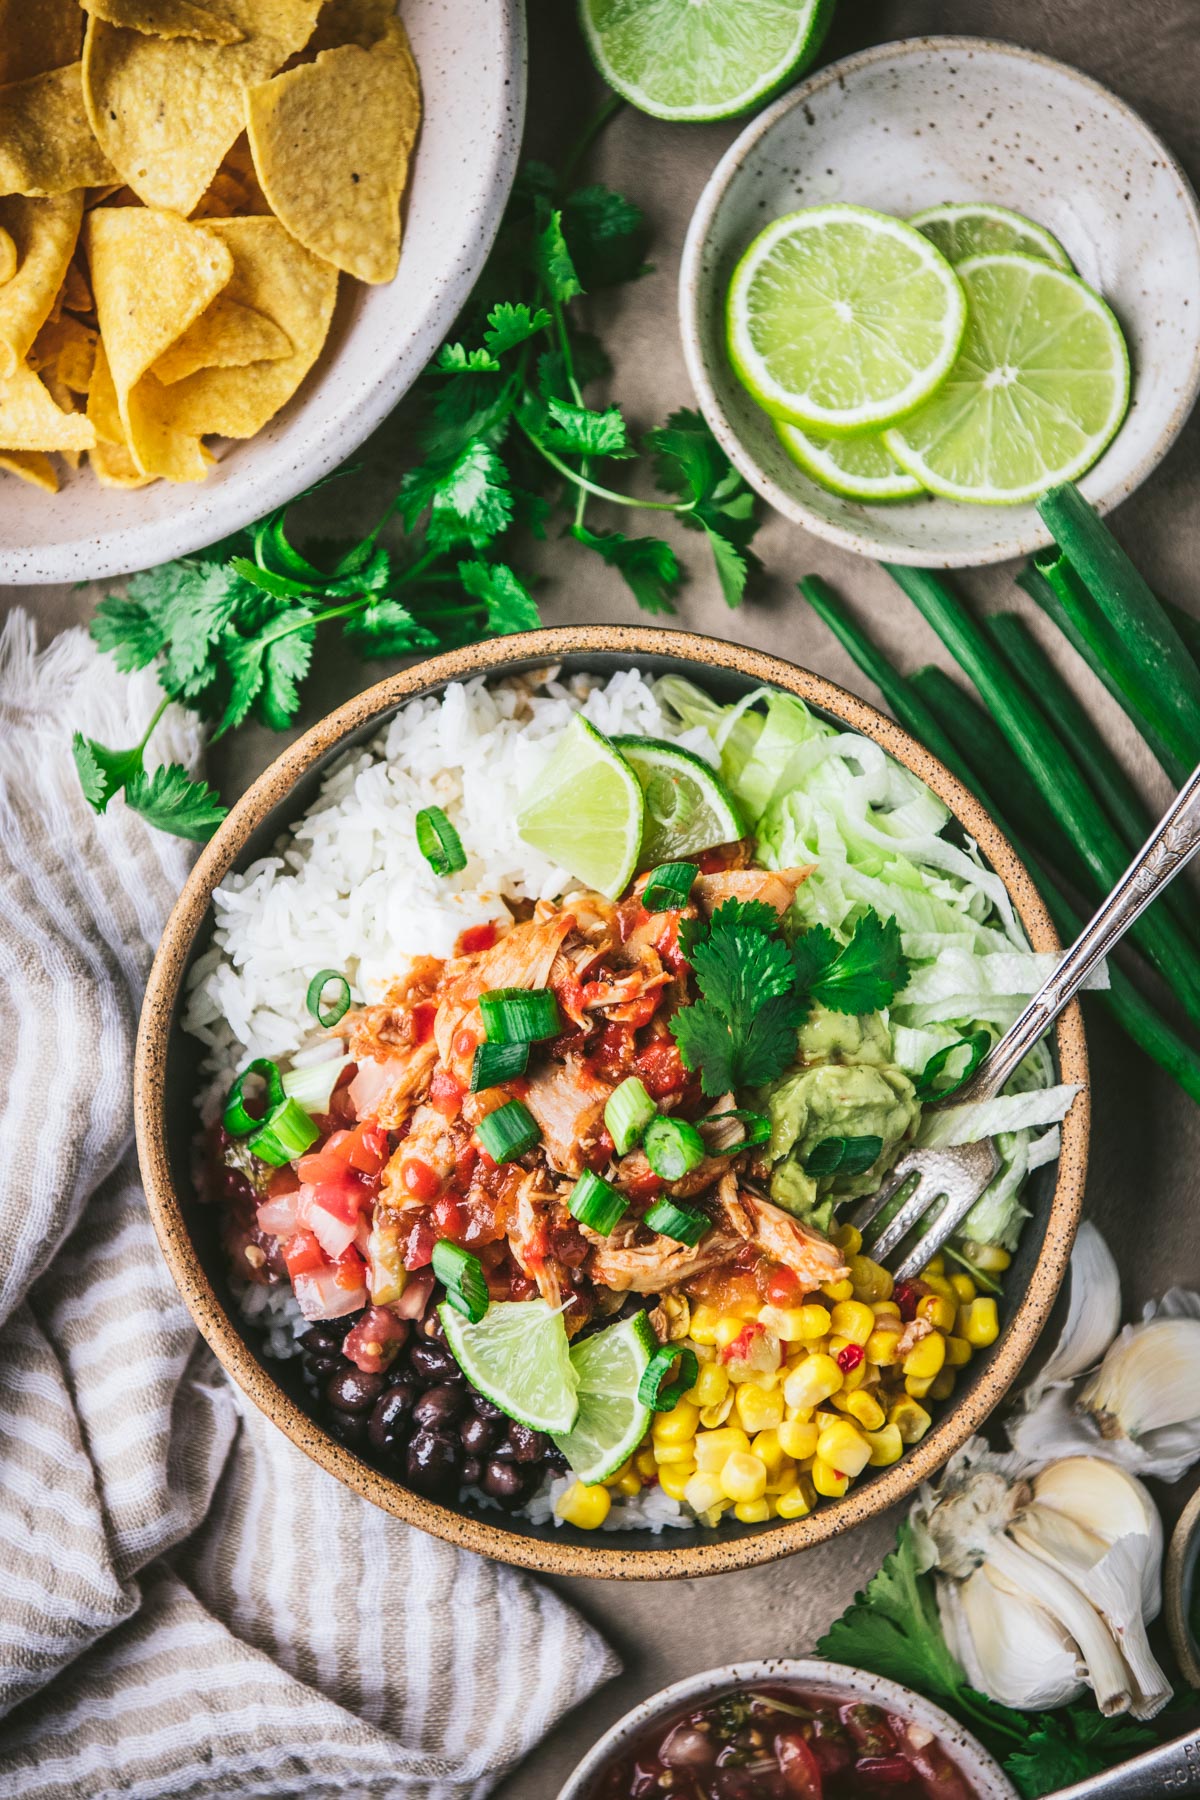 Chipotle chicken bowl with rice and toppings on a table.